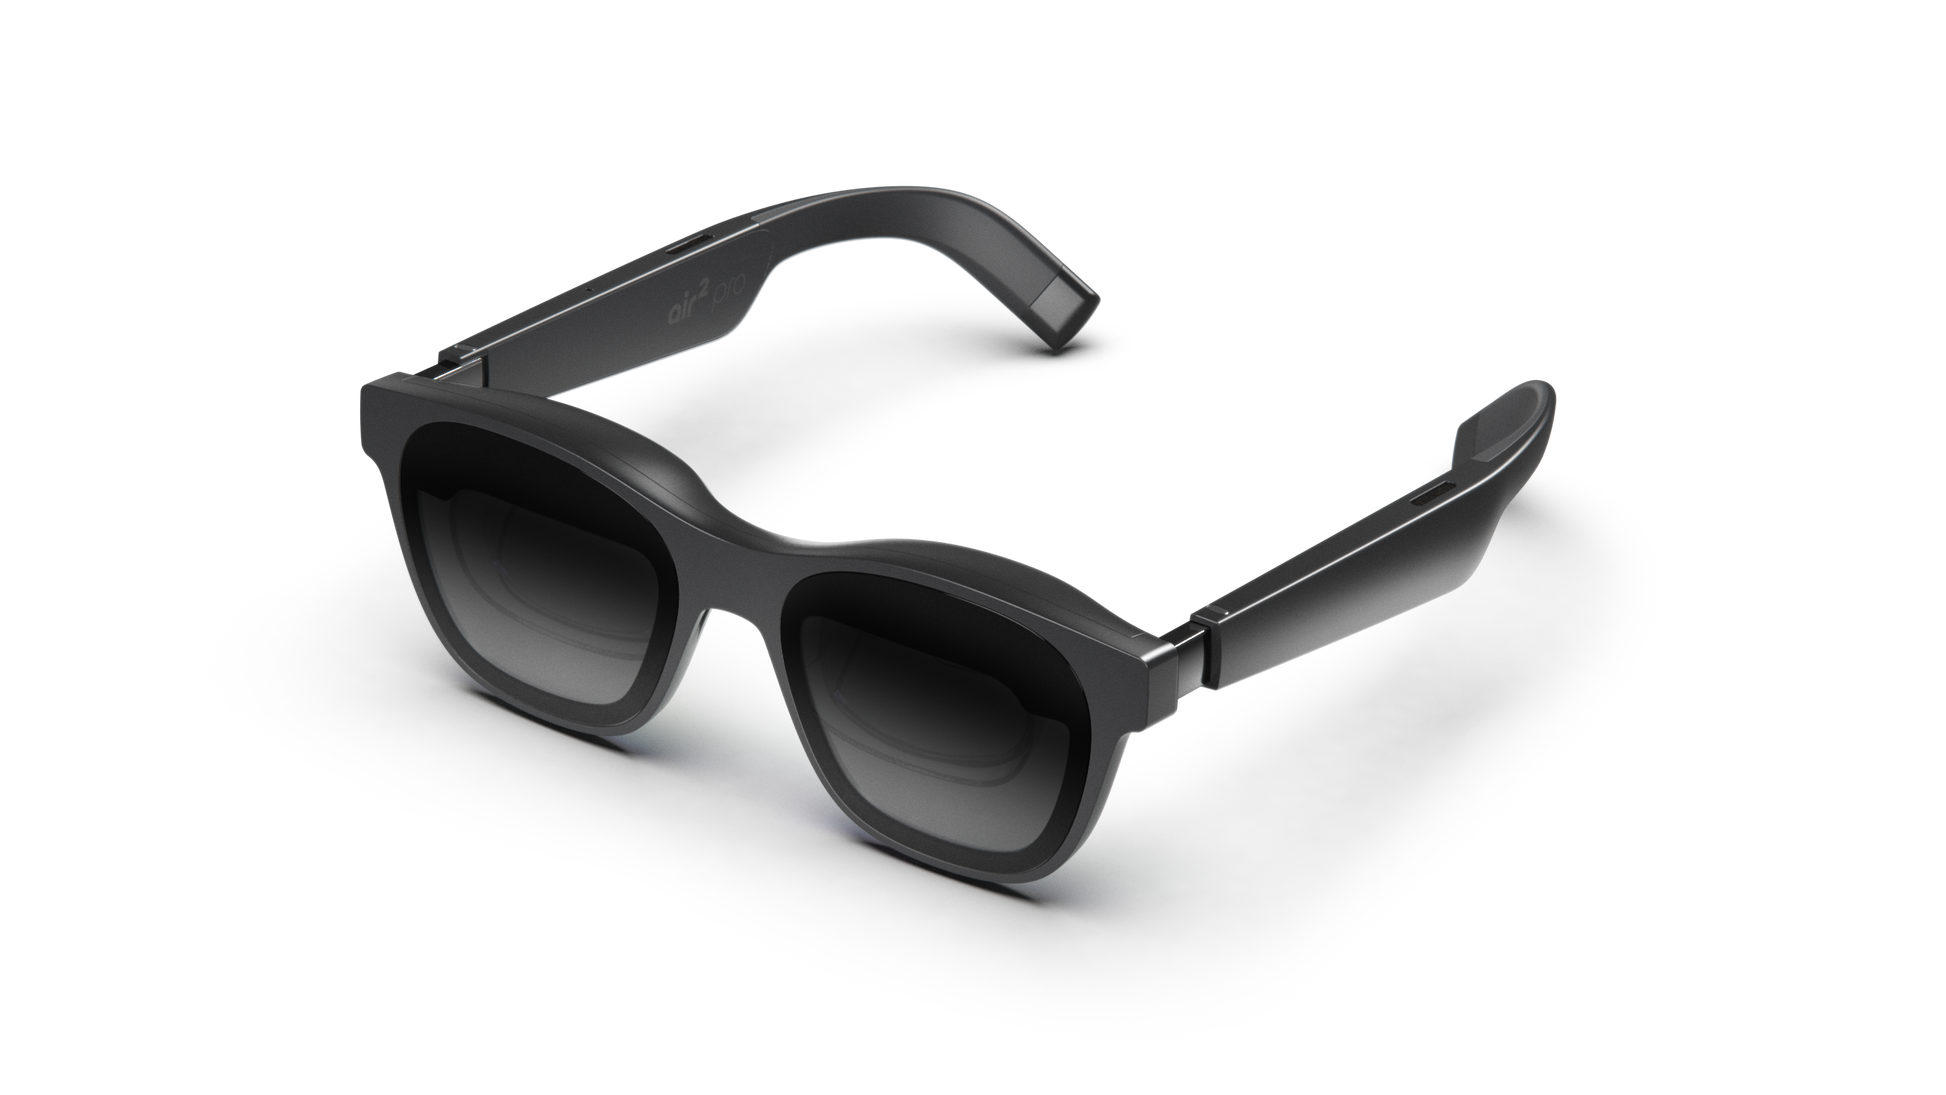 XREAL Air 2 and Air 2 Pro AR Glasses launched in China, pricing starts at  $342 - Gizmochina